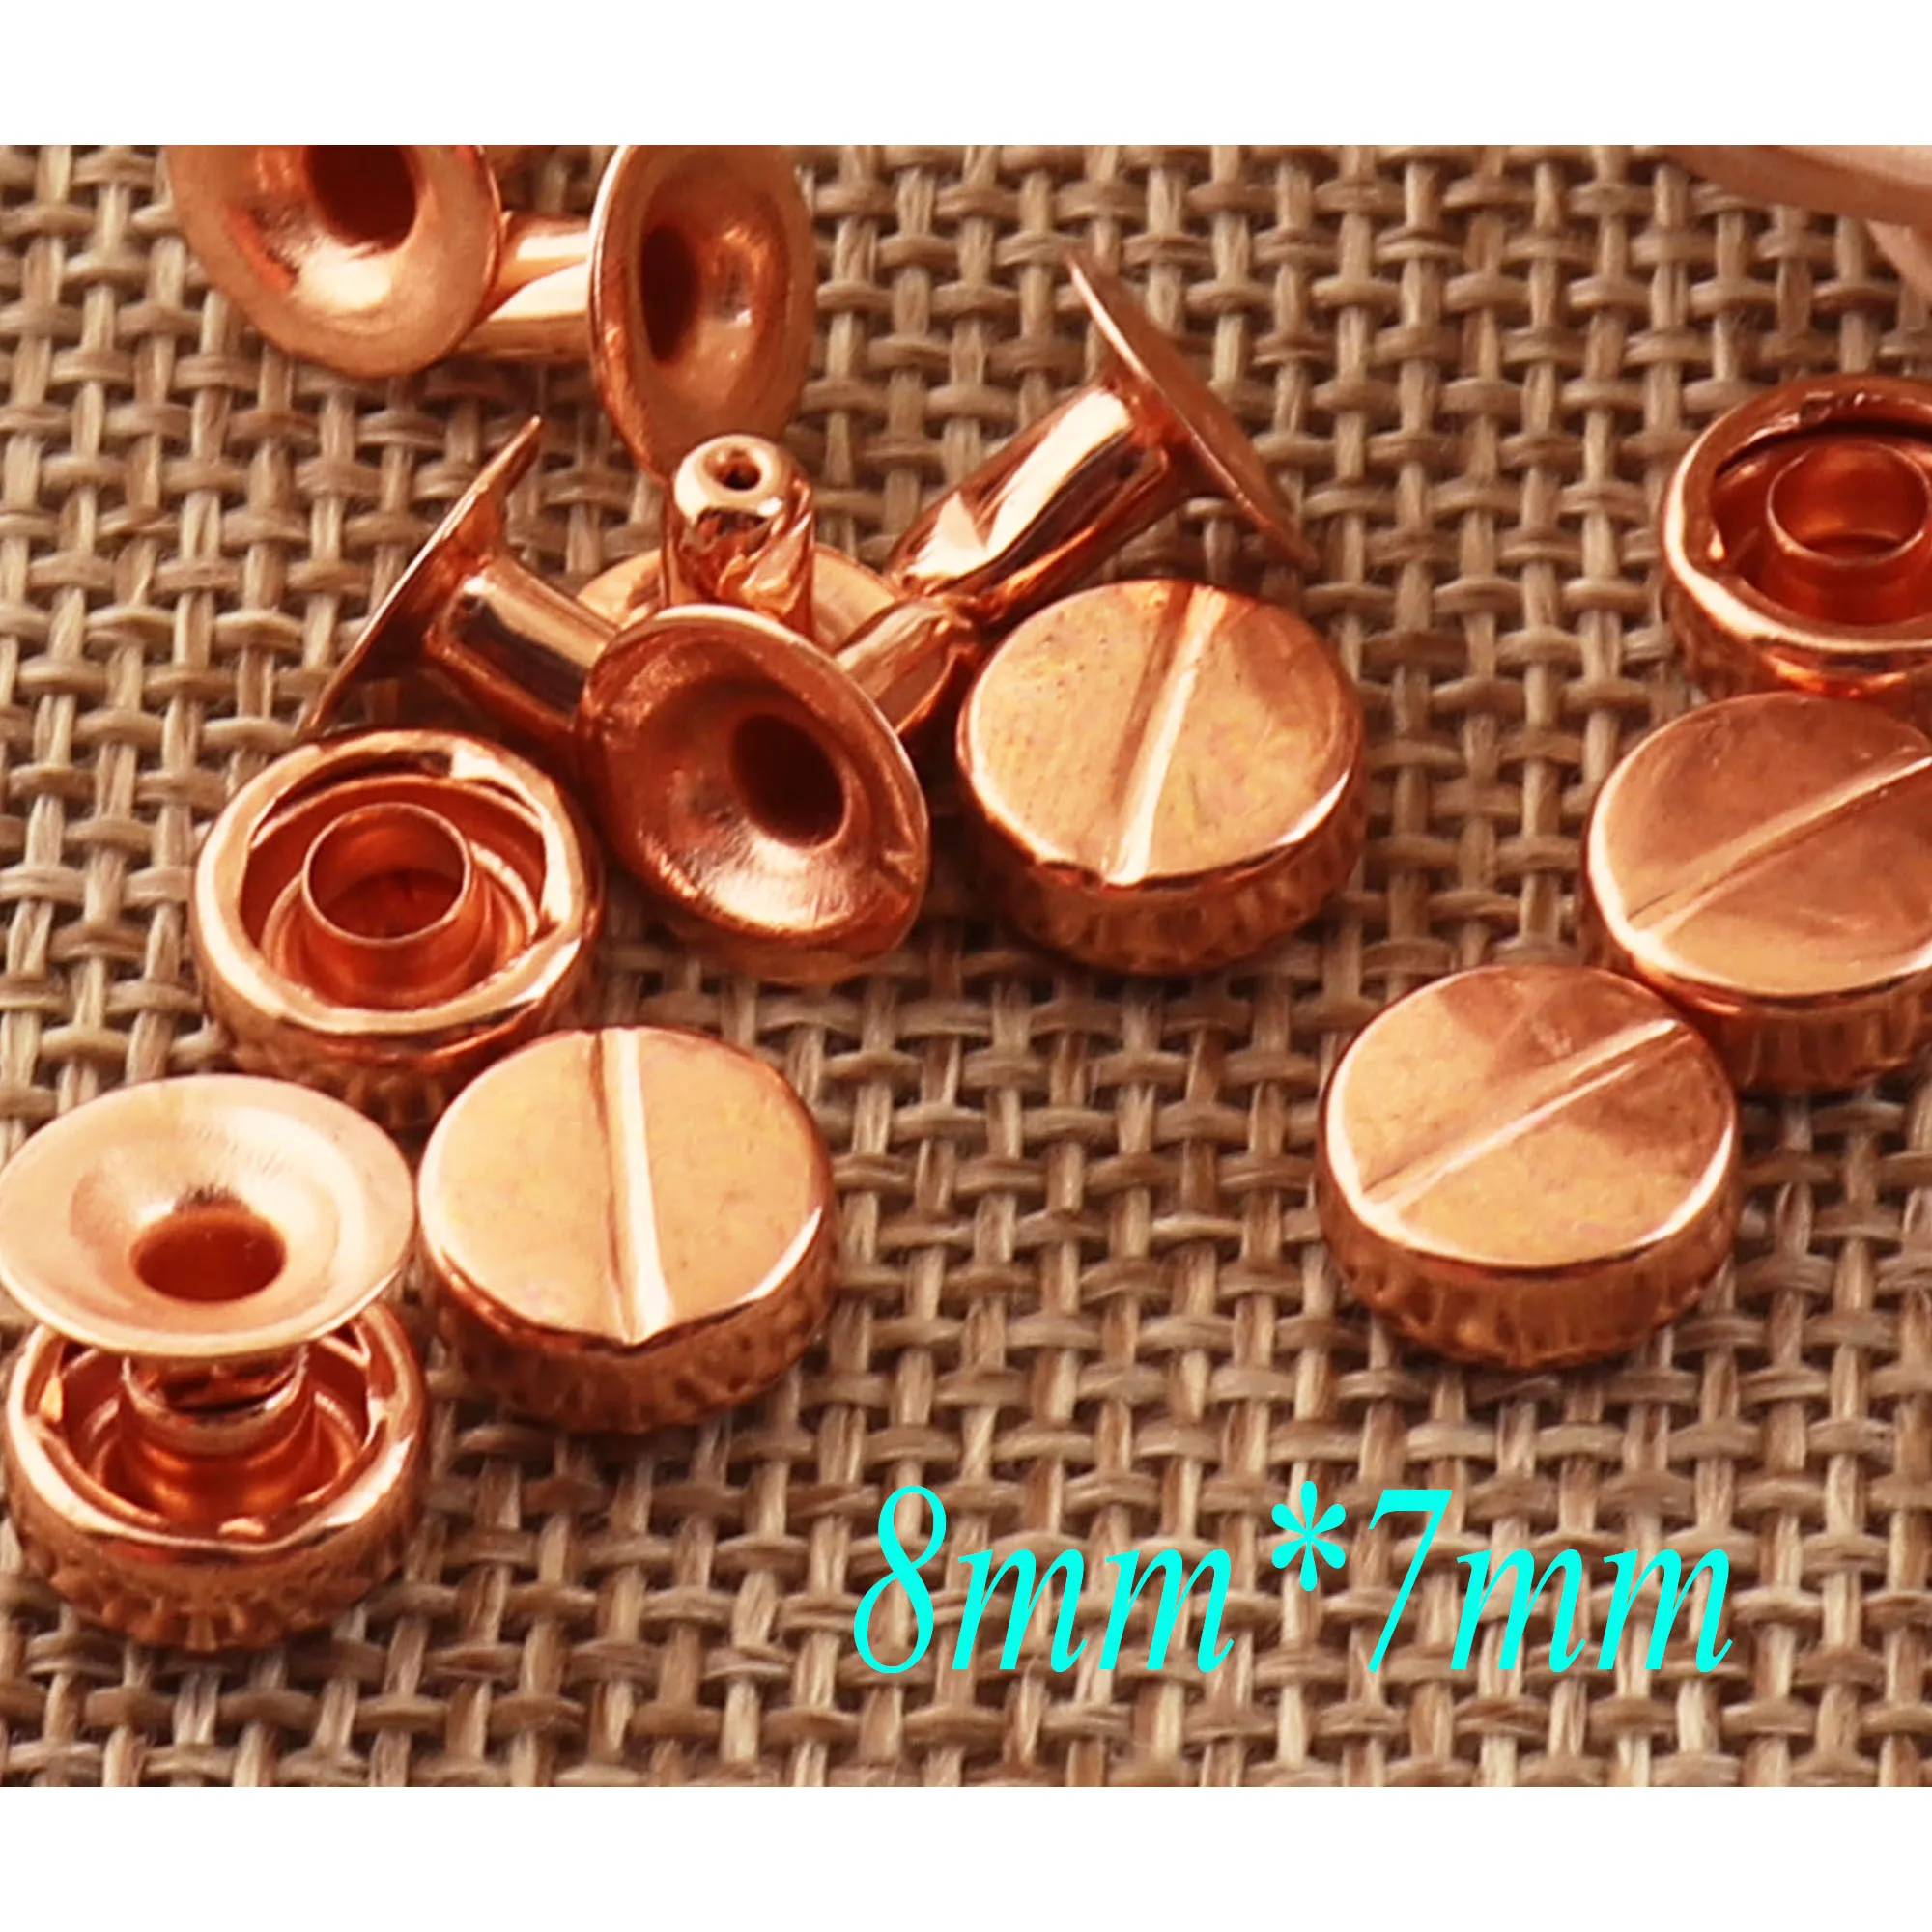 

100sets Rose Gold Double Cap Rivets 3/8"(8mm)Studs Leather craft Rivet Fastener Snaps Prong Riveted Studs